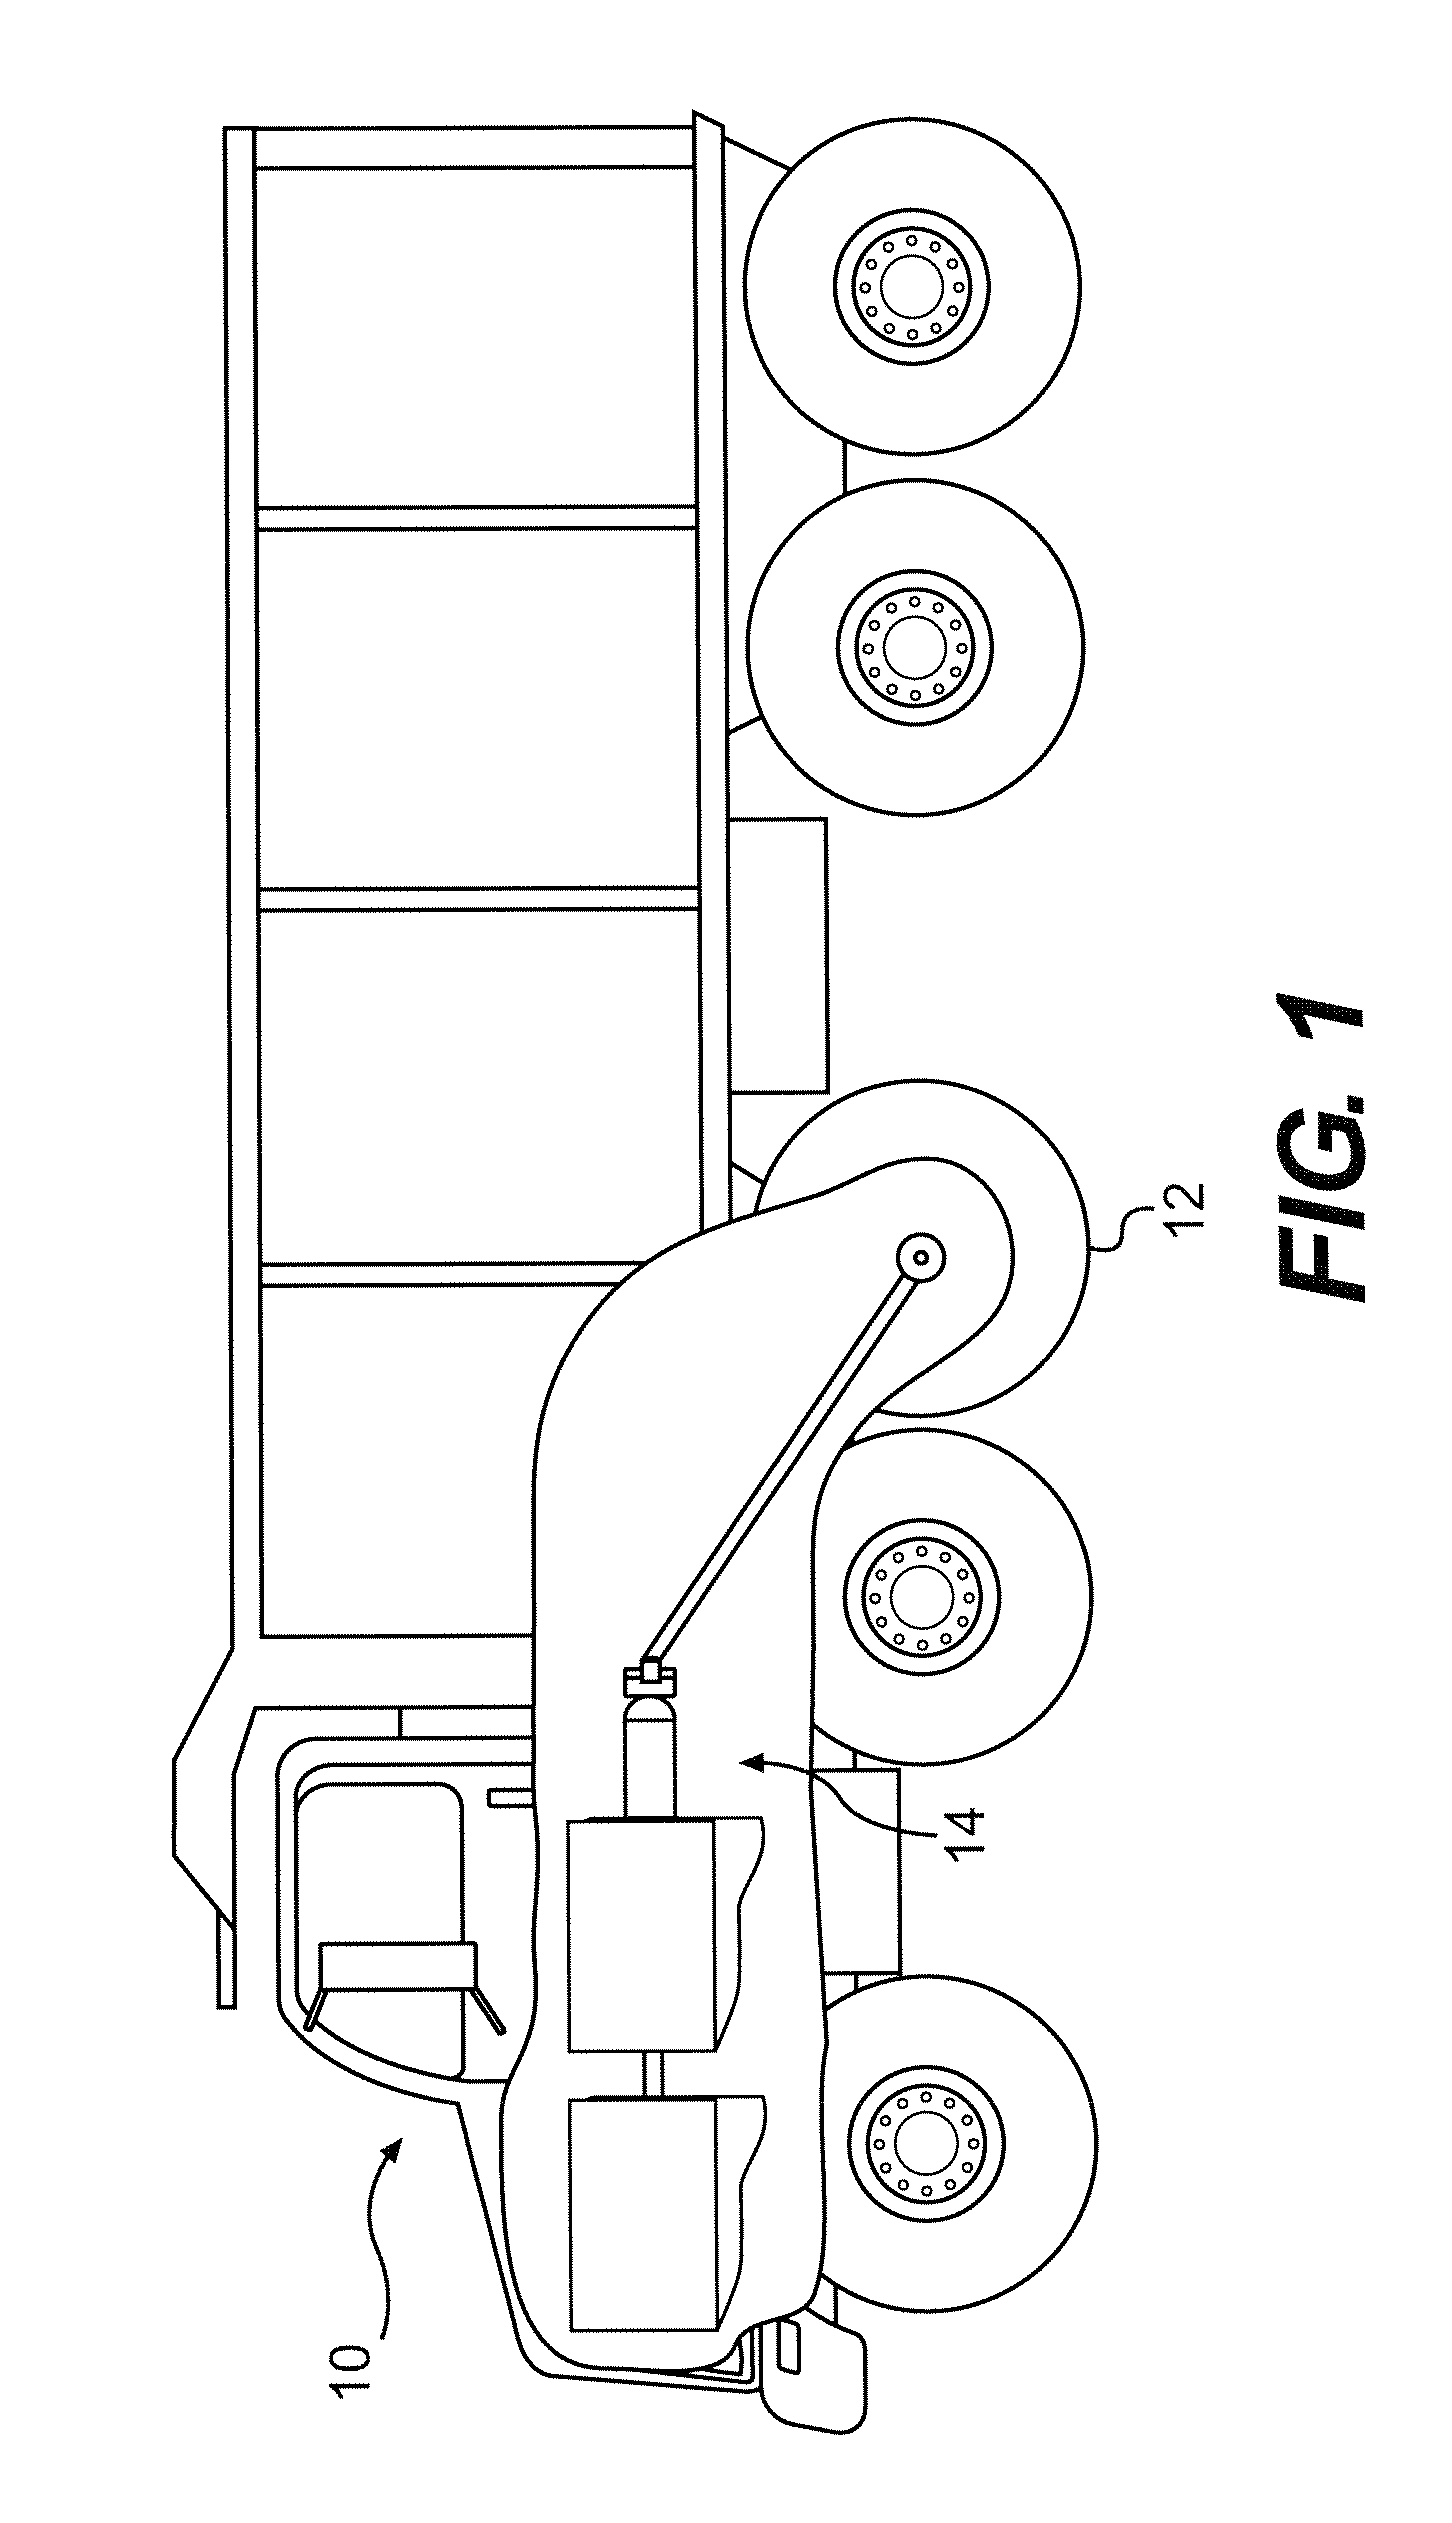 Multi-engine system with on-board ammonia production